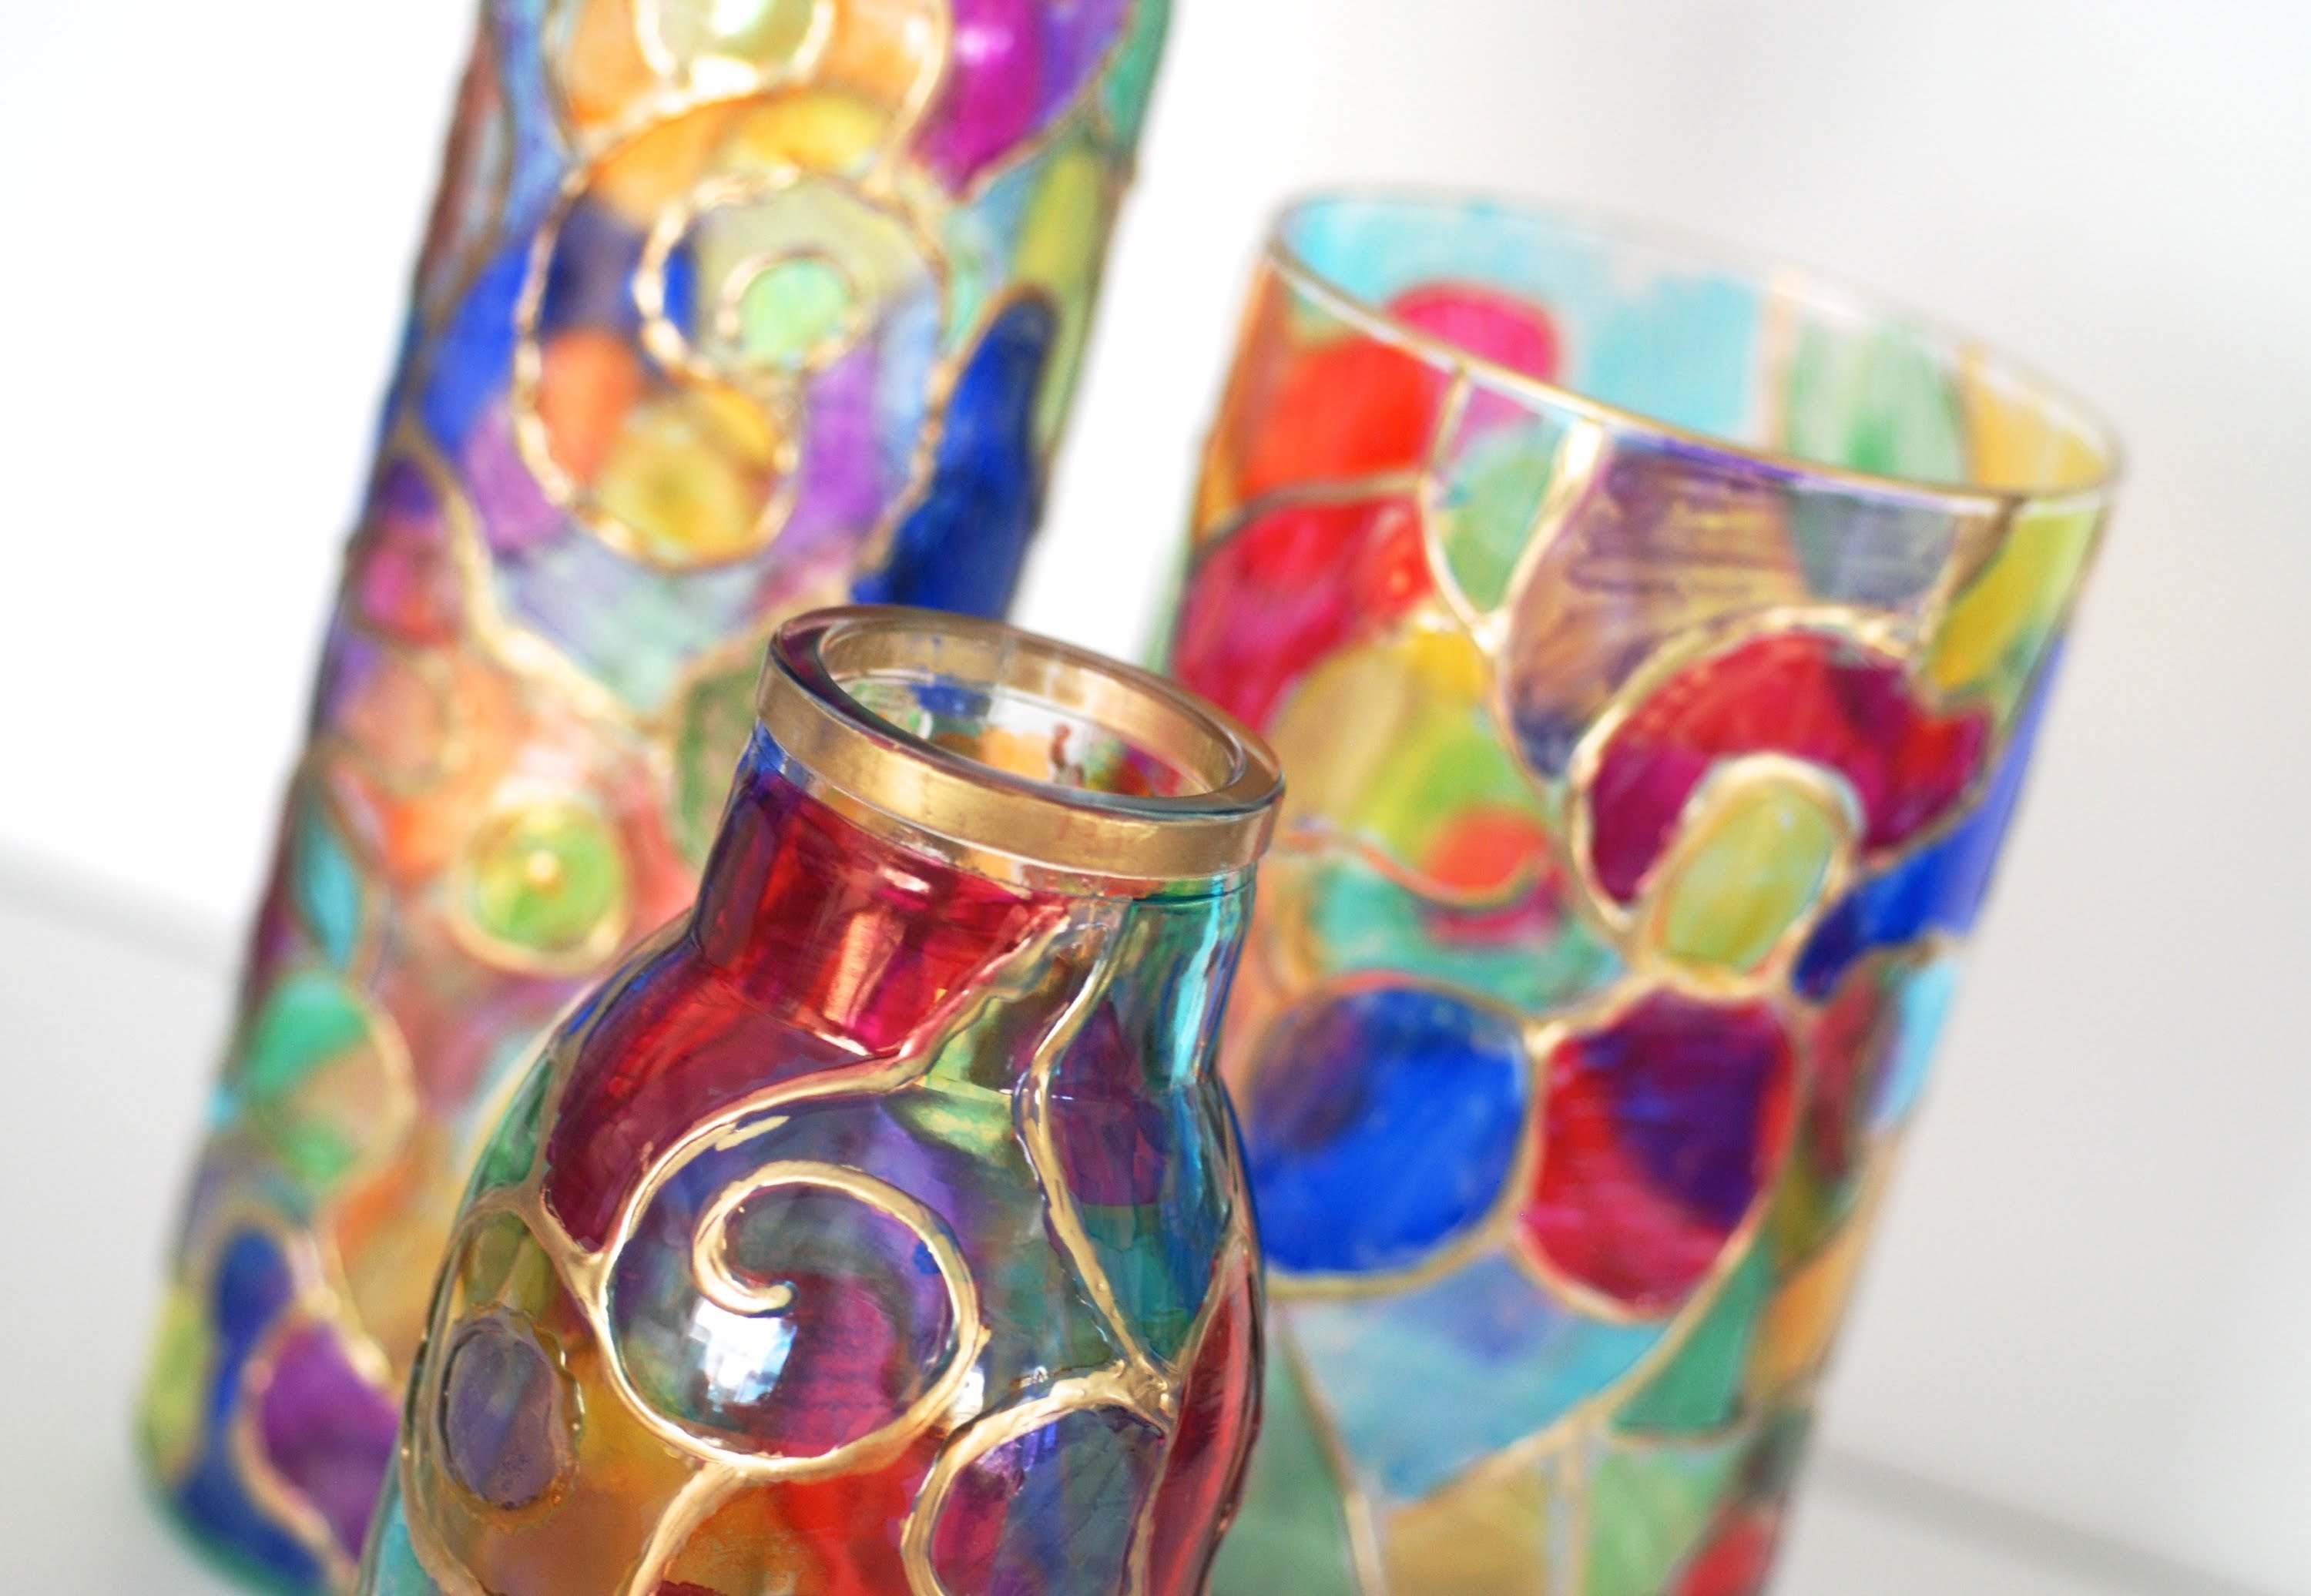 Creating Stained Glass Jars with Copics - YouTube